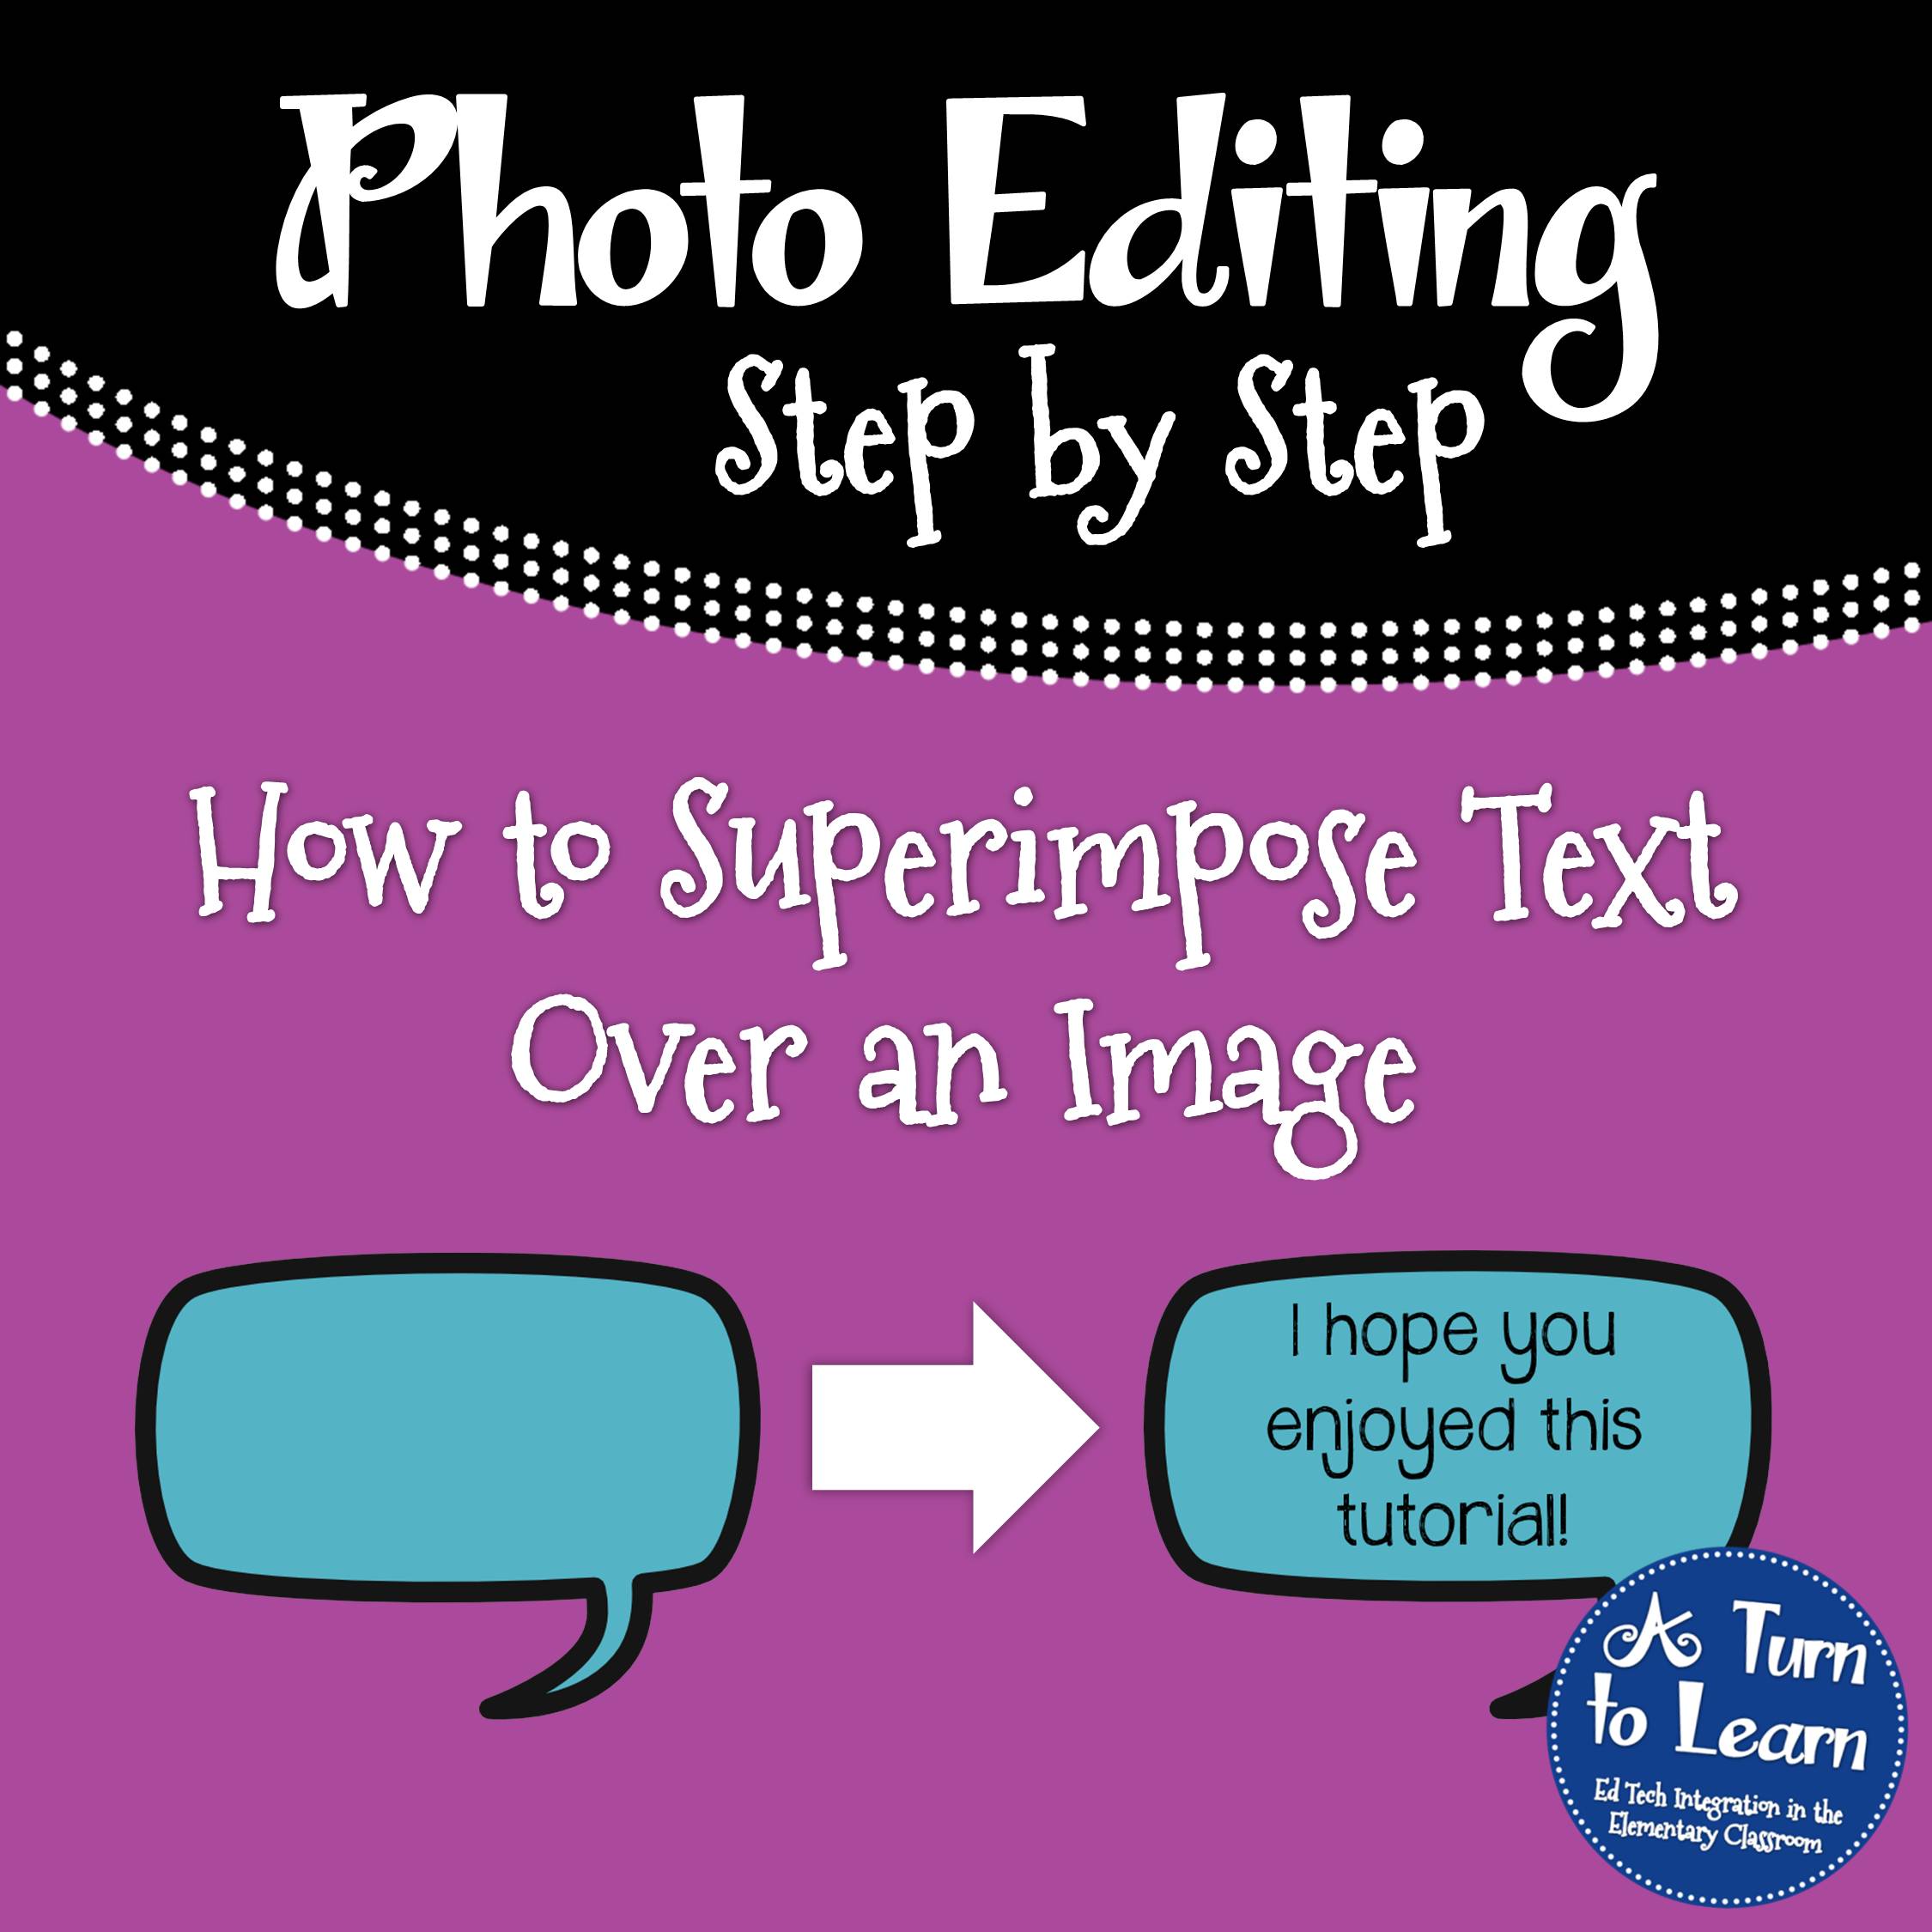 How to Superimpose Text on an Image